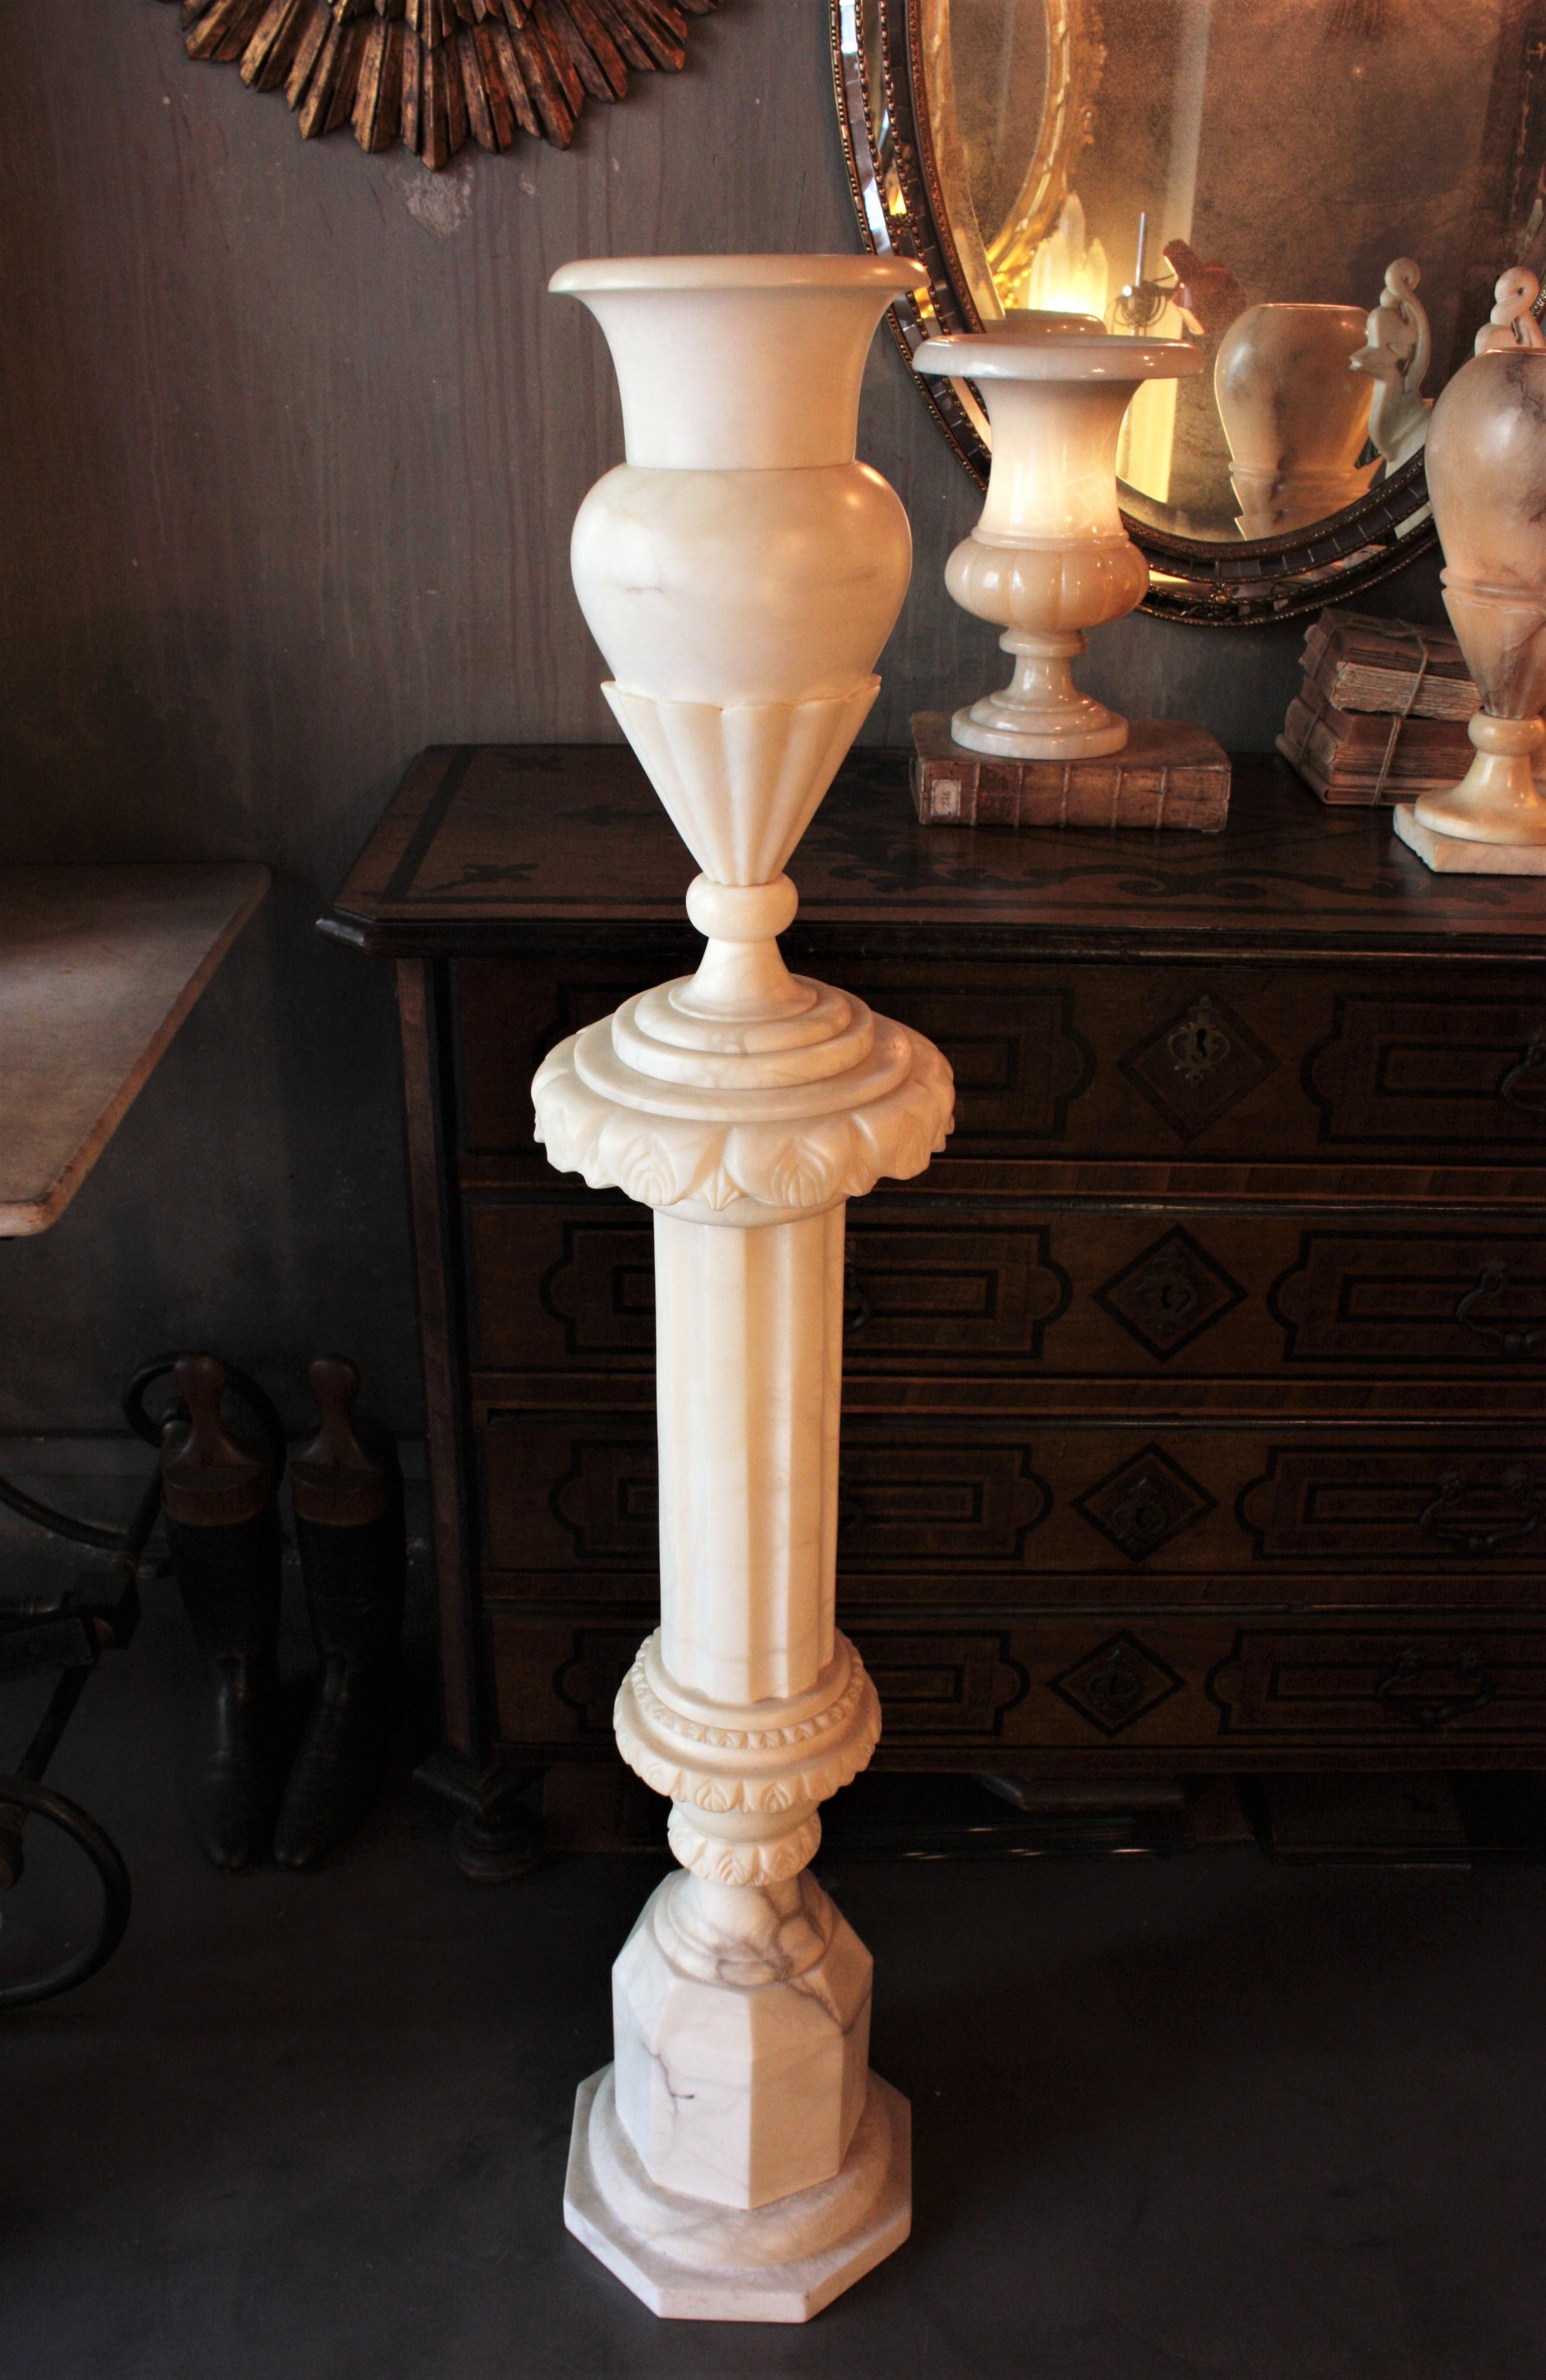 Outstanding Art Deco carved alabaster urn lamp on column pedestal, Spain, 1930s
This Art Deco period alabaster floor lamp has an elegant neoclassical design. The Urn urplighter lamp stands on a column pedestal stand with octogonal base and